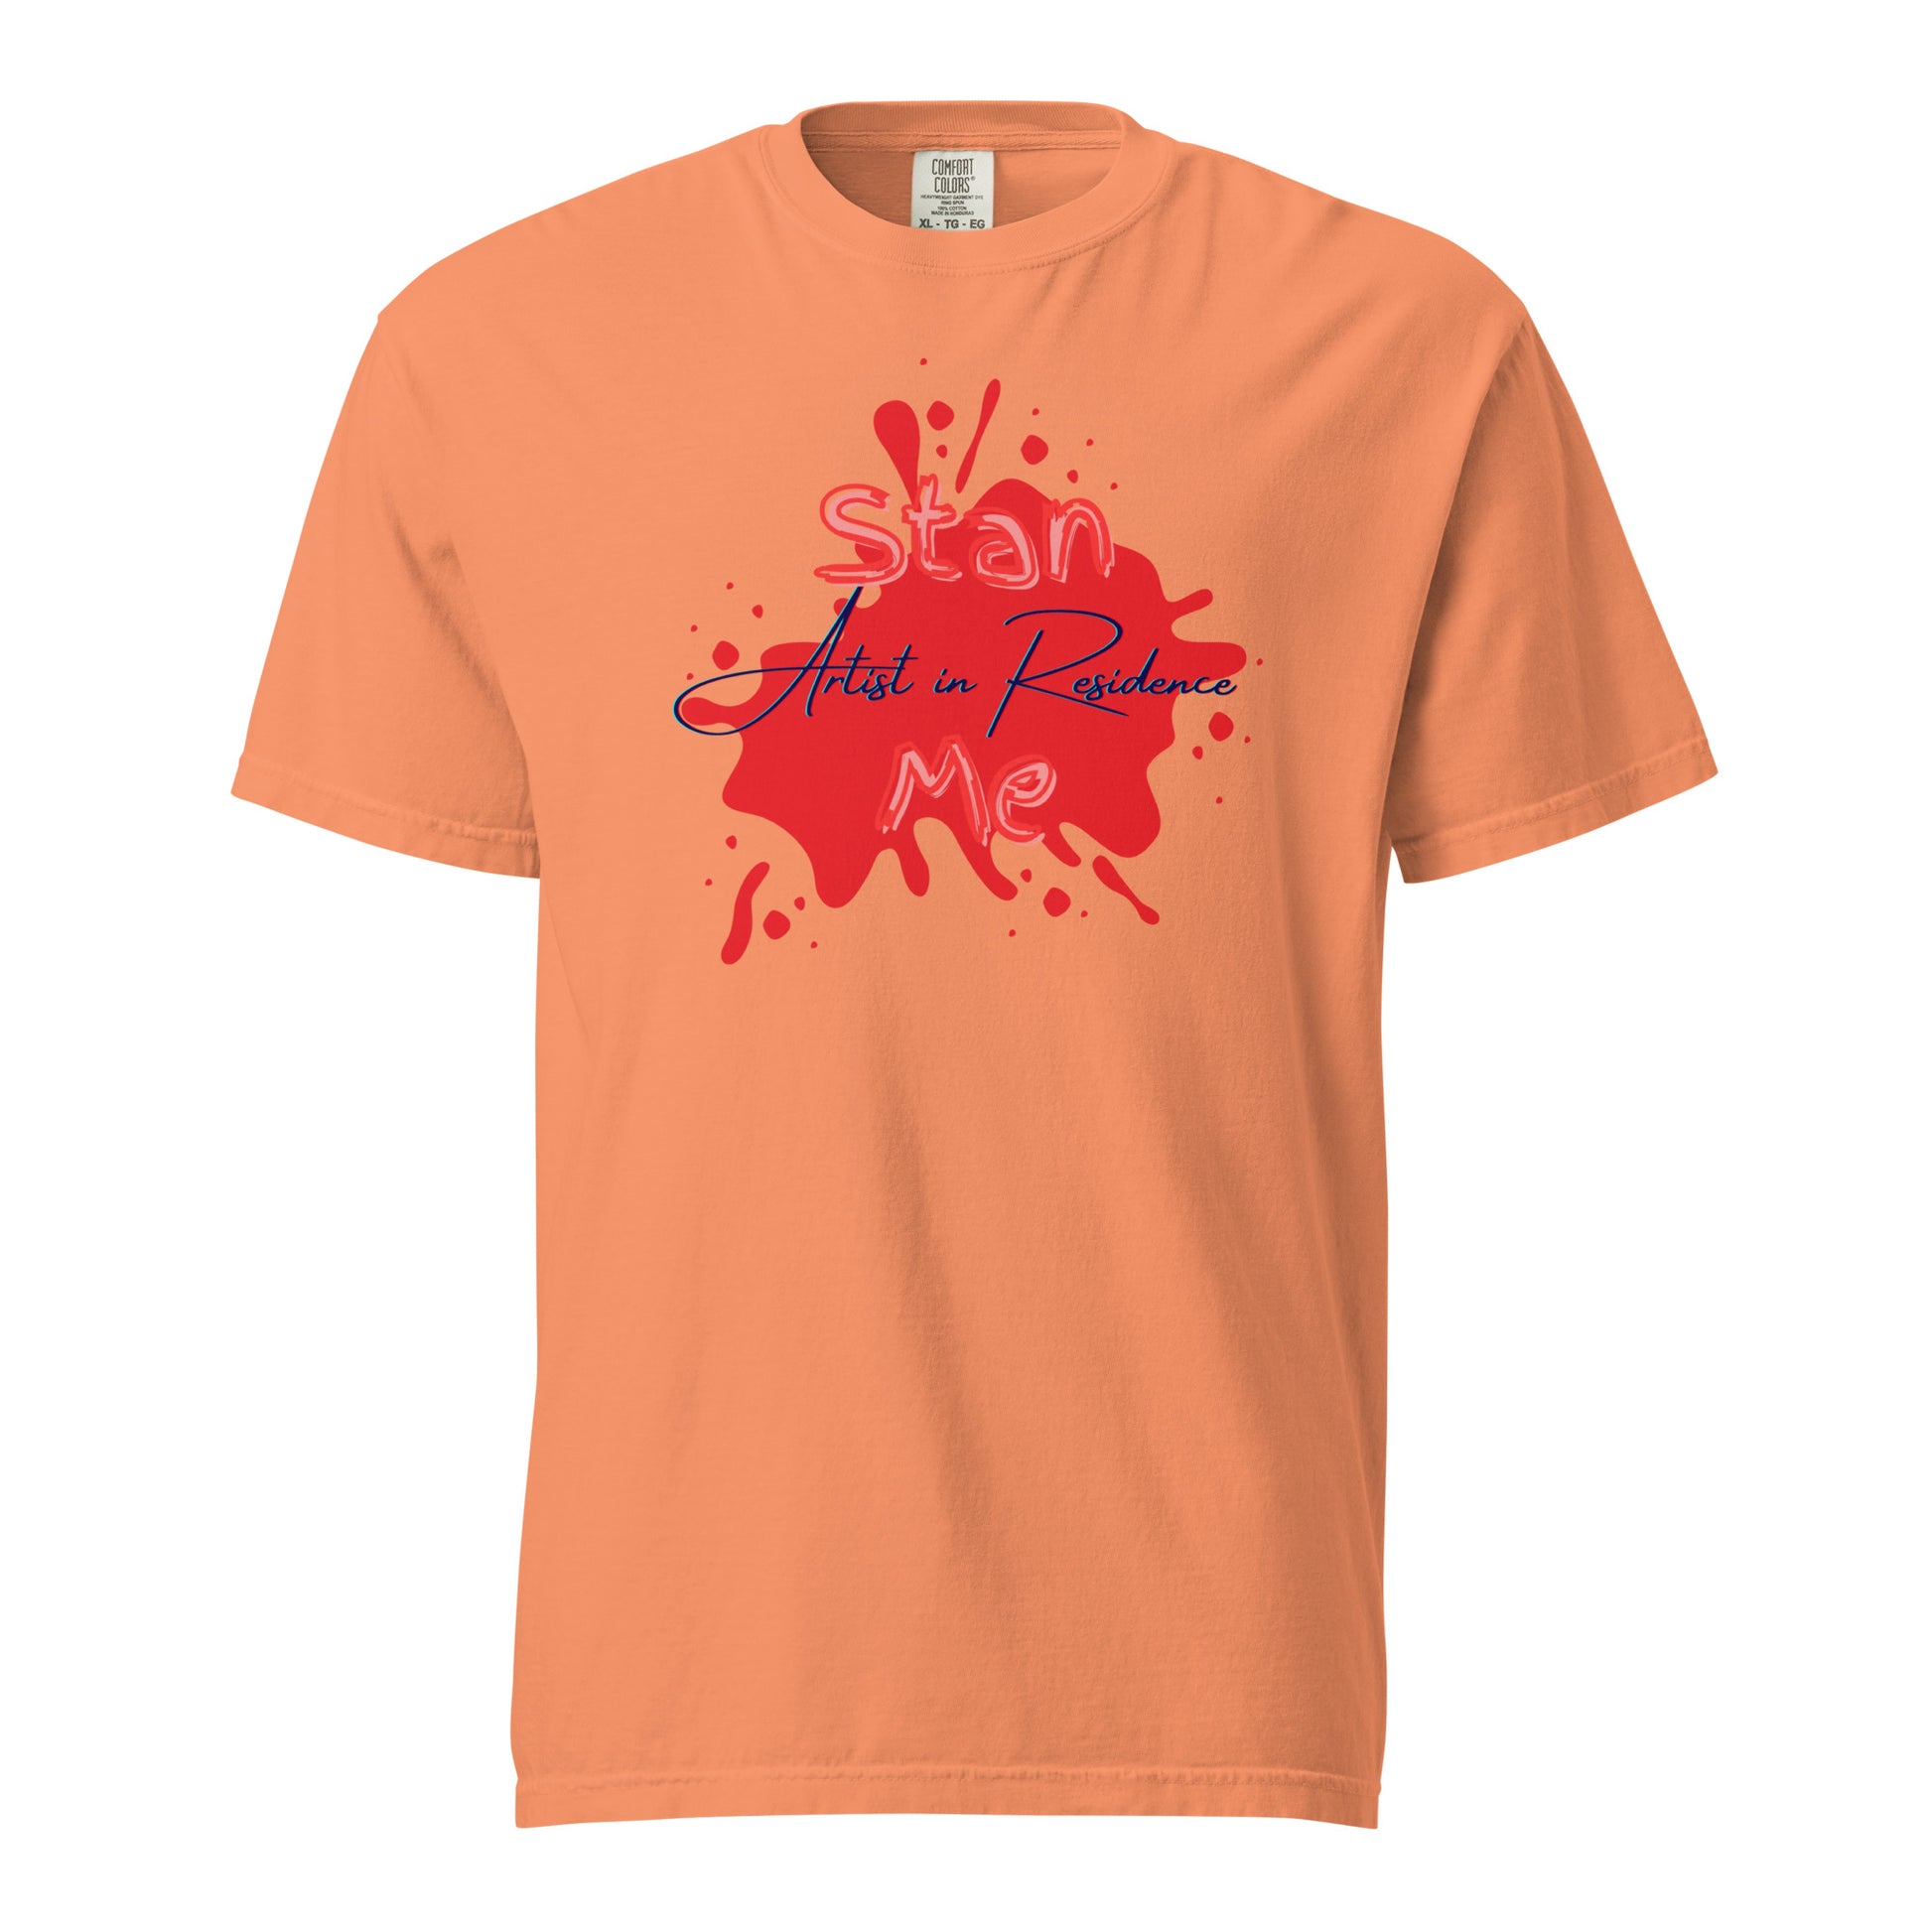 “Stan Me, Artist in Residence” tees featuring paint splatter designs, blending artistic creativity with stan culture. Available in 8 unique styles. Perfect for artists looking to attract fans and gigs. orange tee